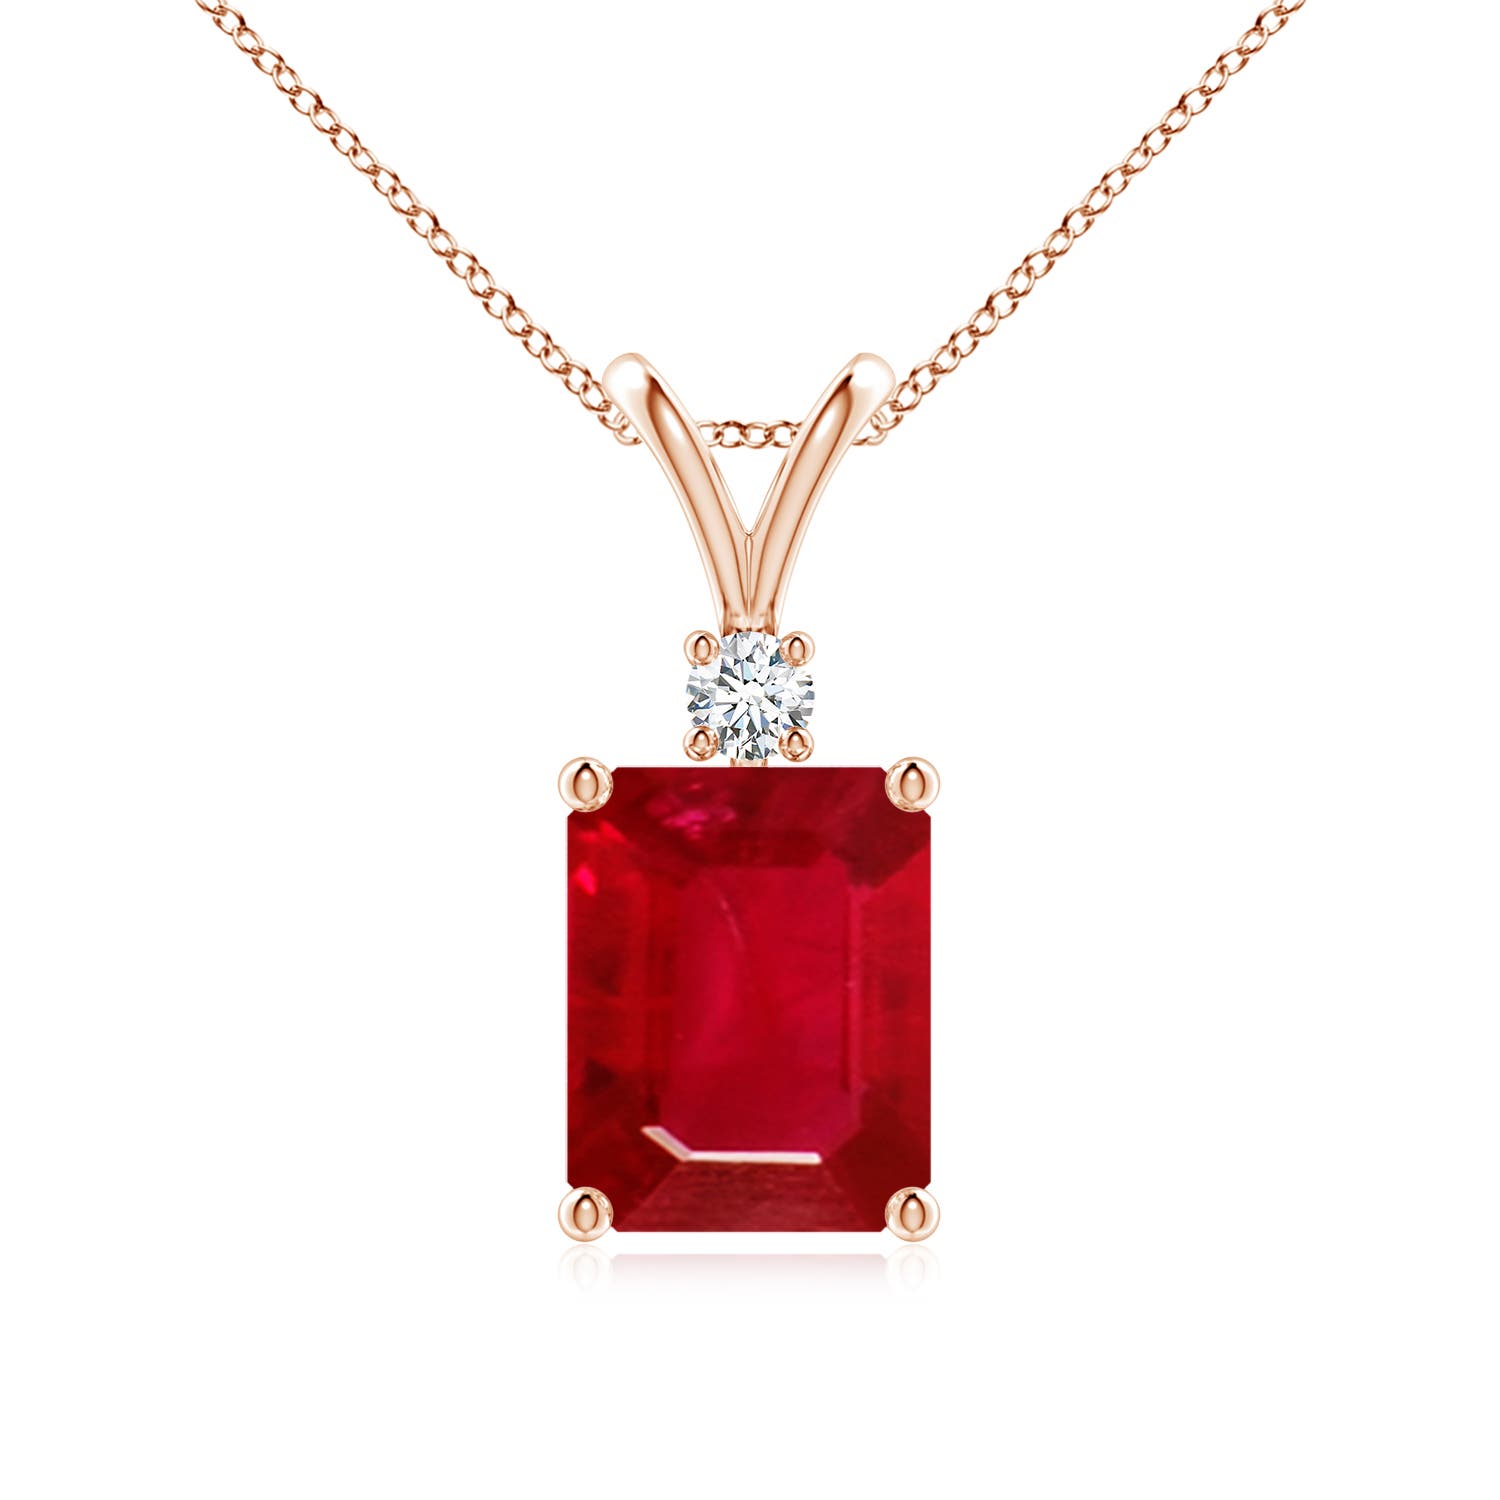 AAA - Ruby / 3.07 CT / 14 KT Rose Gold